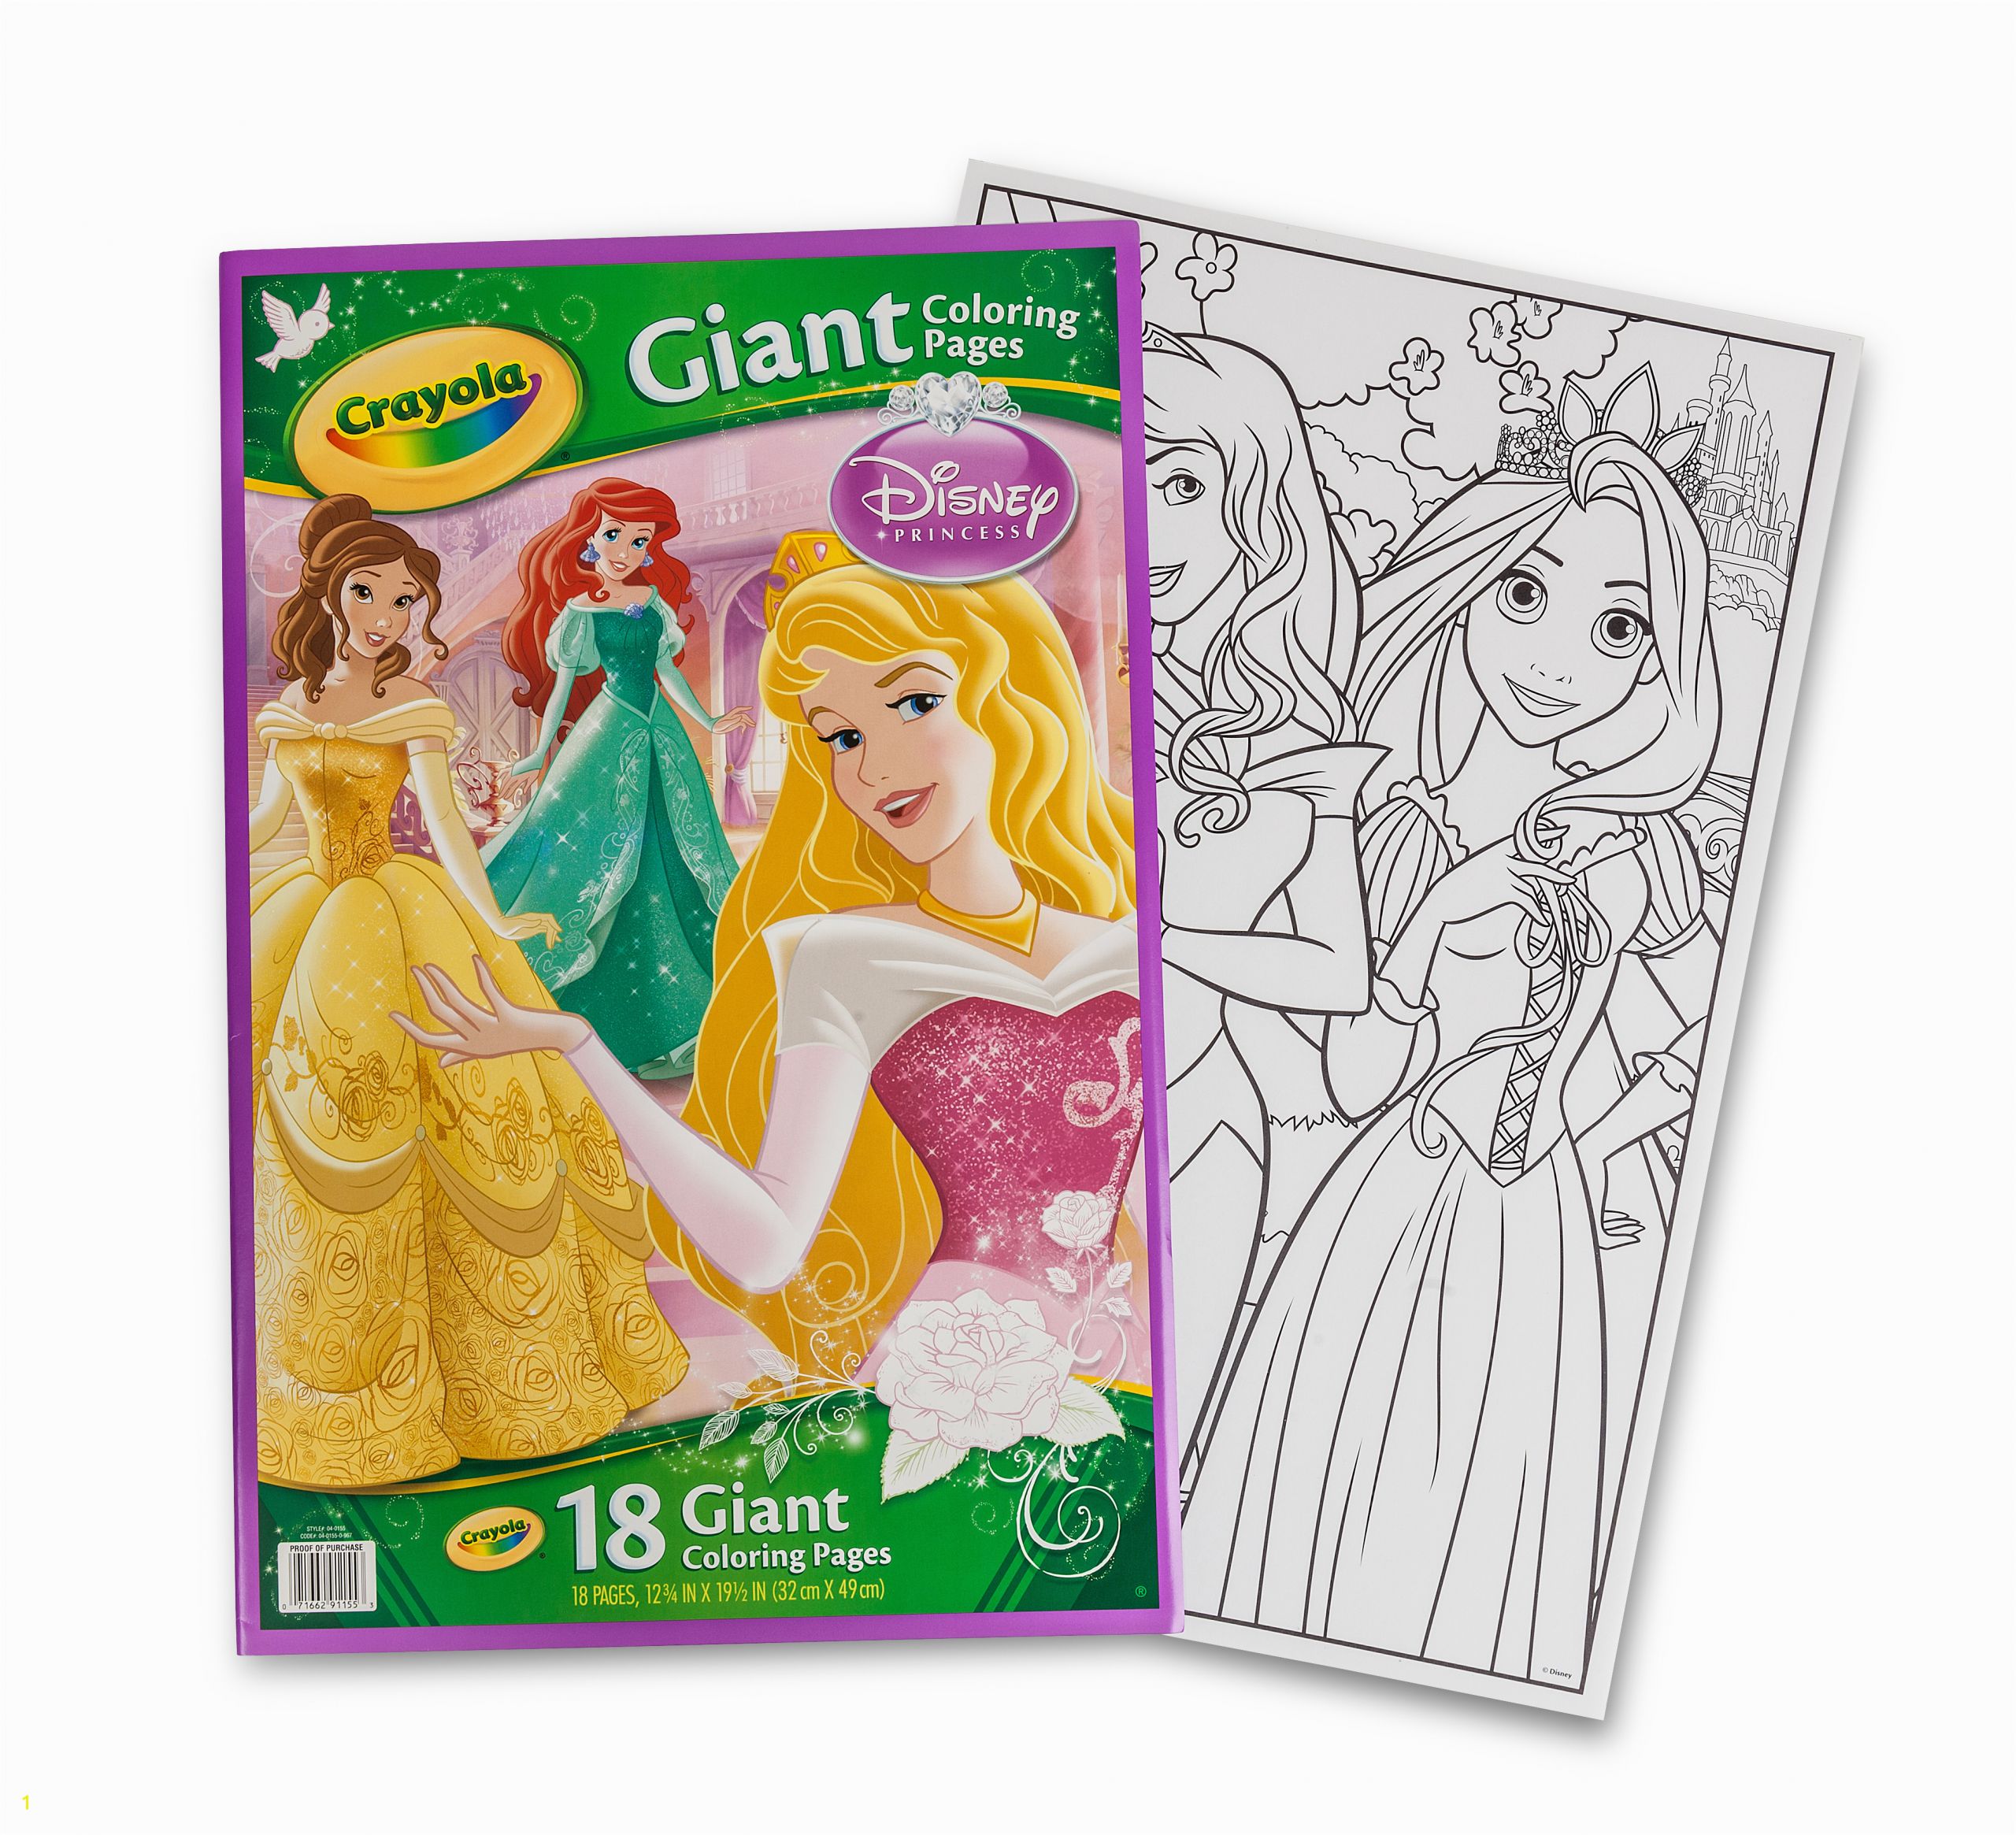 giant coloring pages disney princess